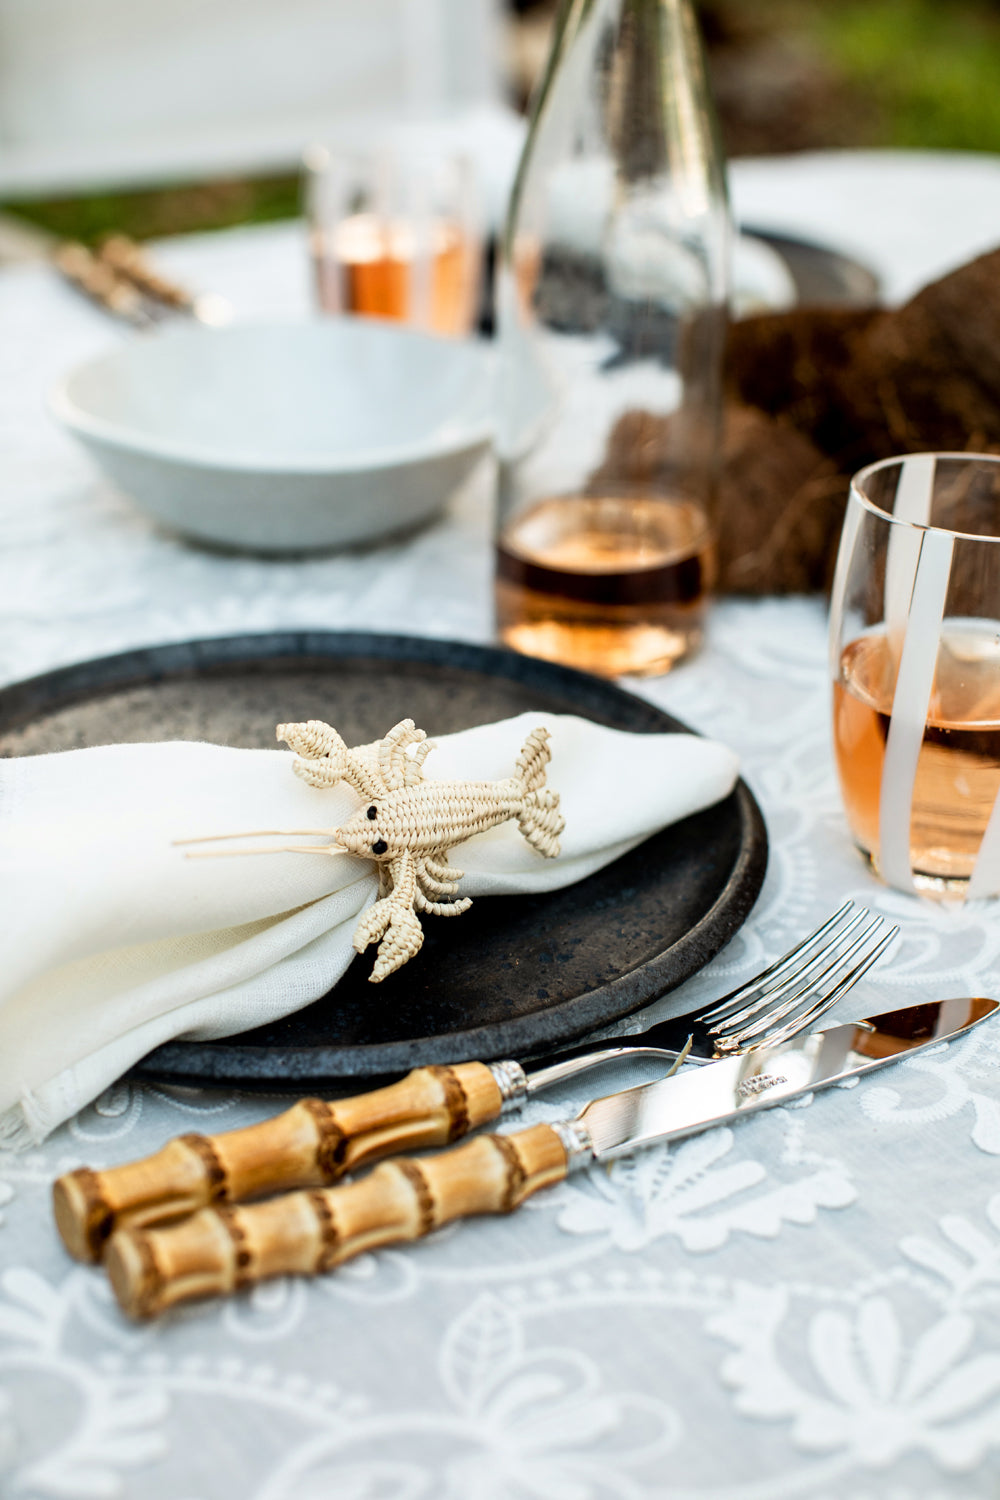 The Crab and Lobster Napkin Rings 